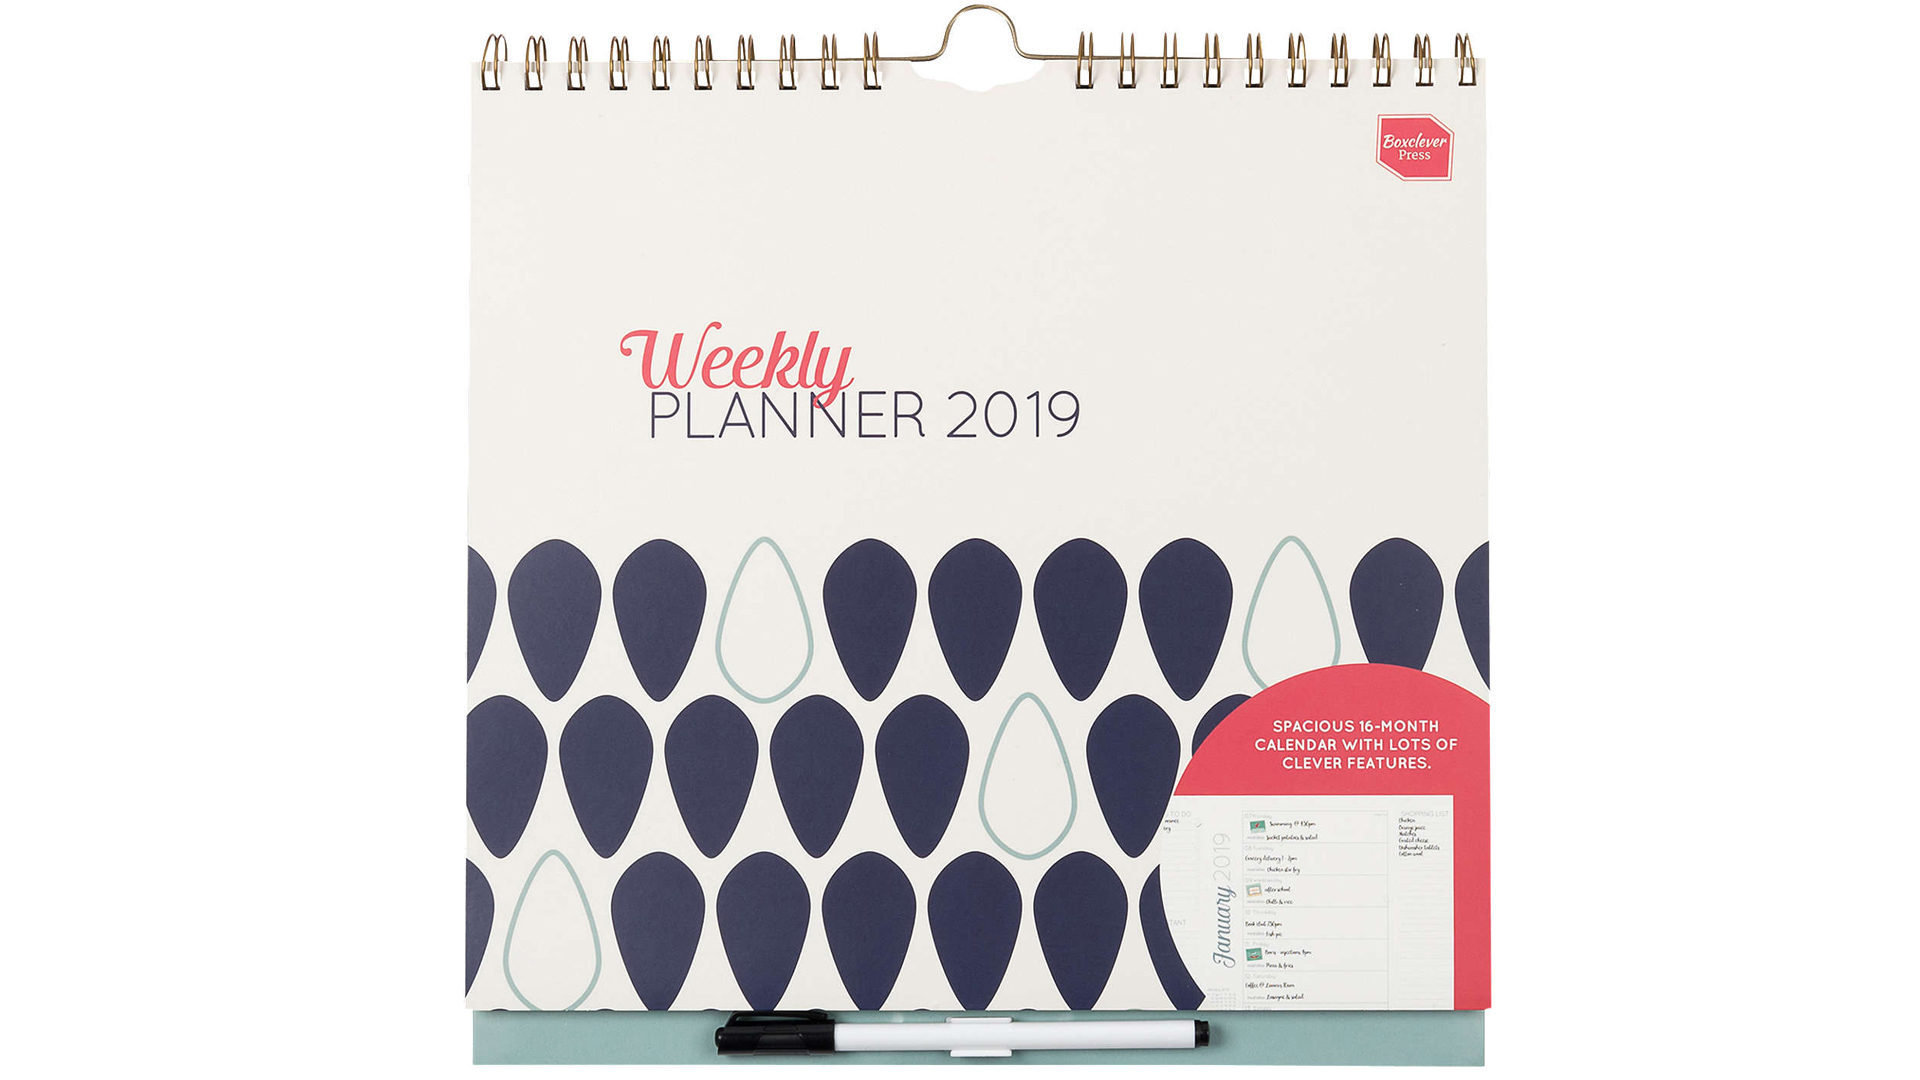 Boxclever Press 2019 Weekly Planner 